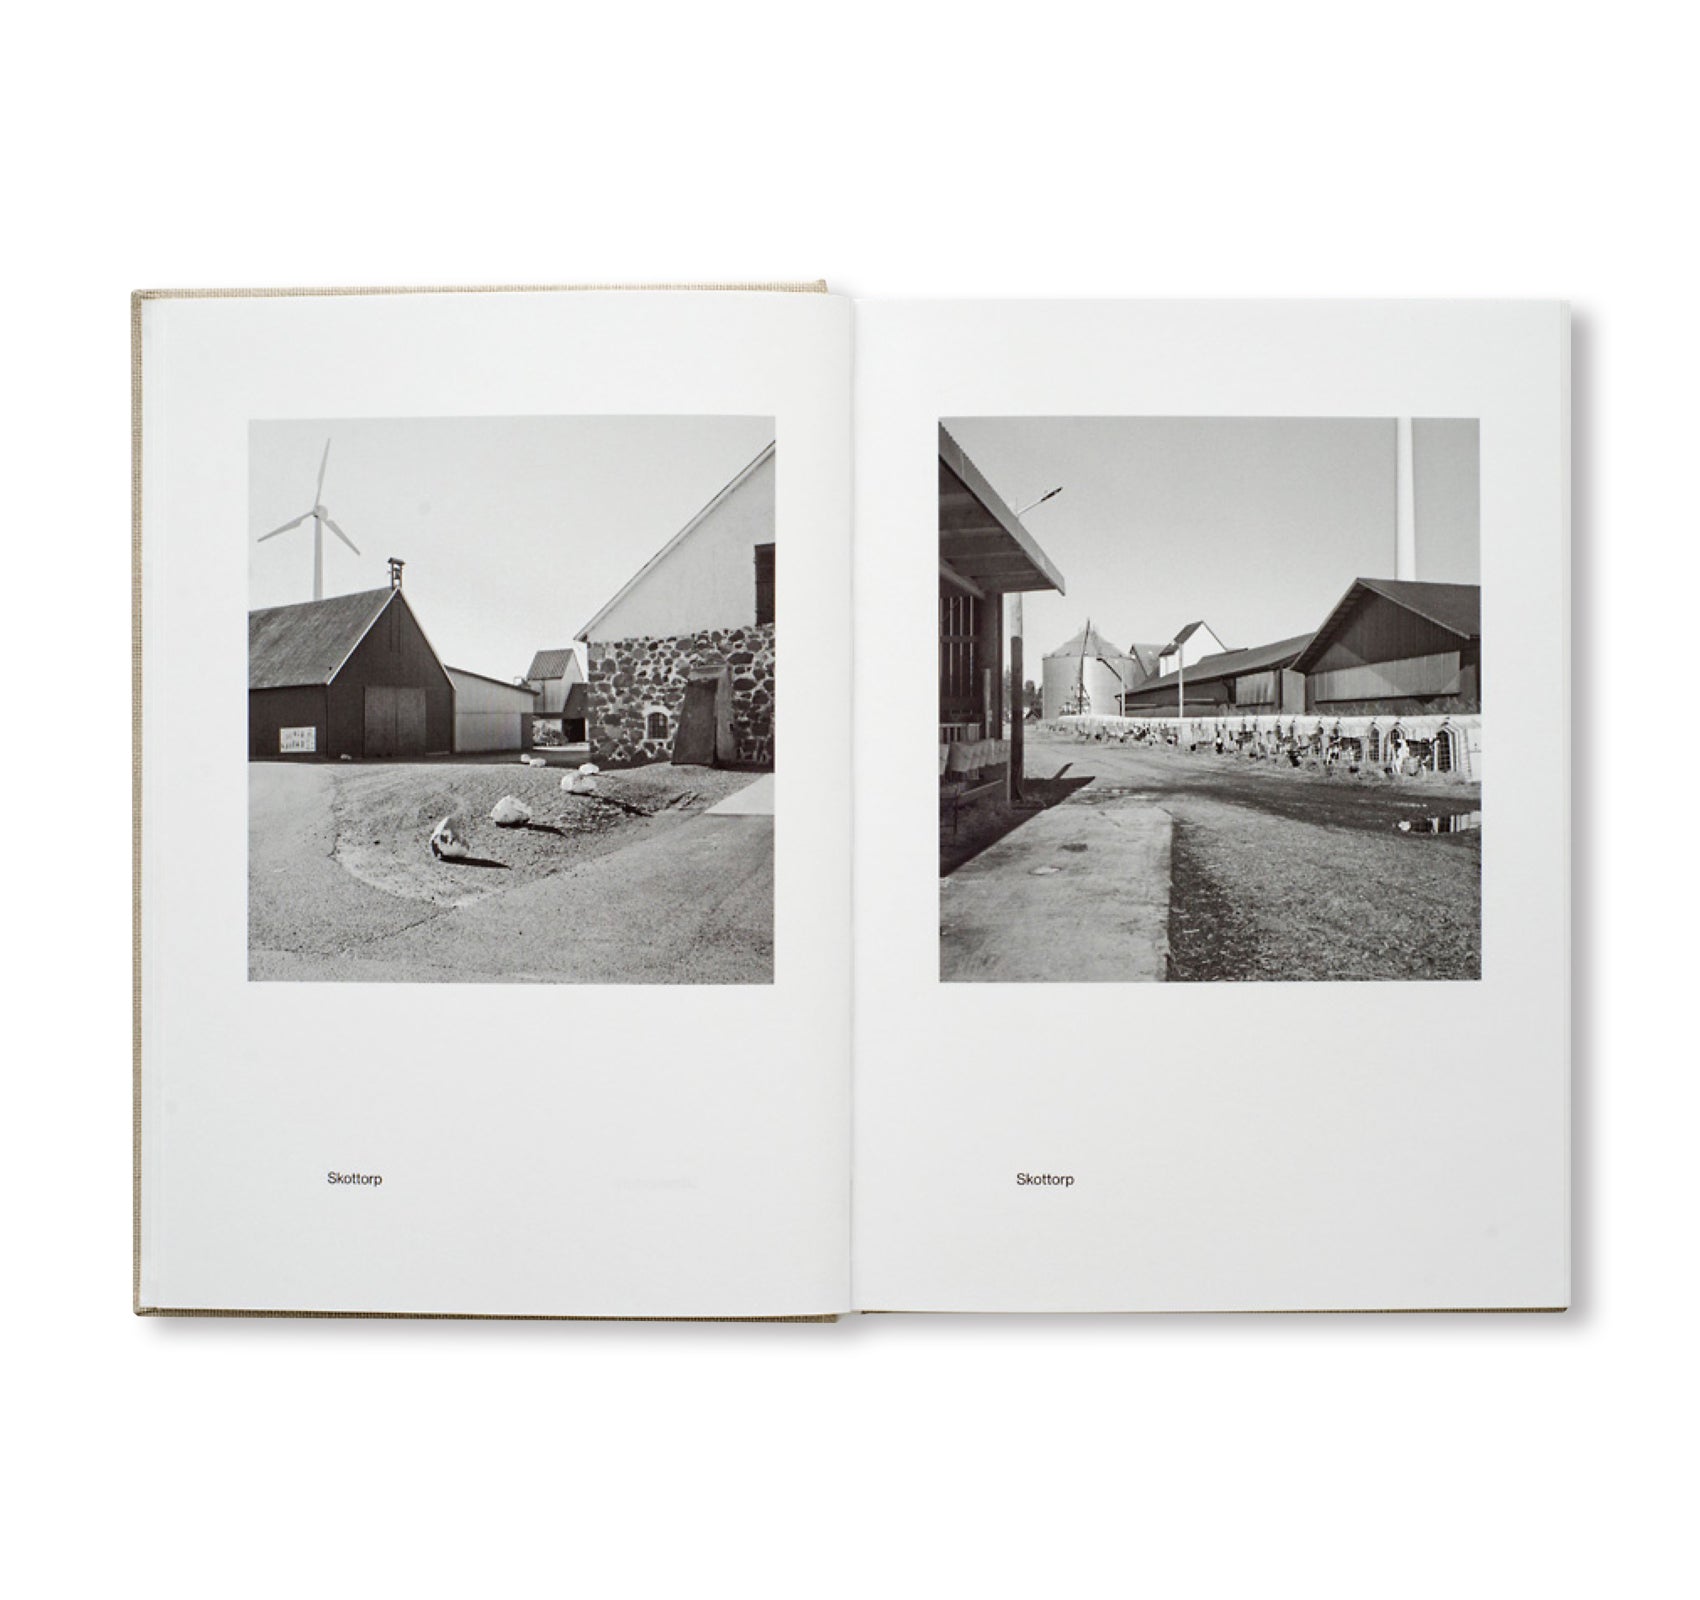 HALLAND by Gerry Johansson [SIGNED]